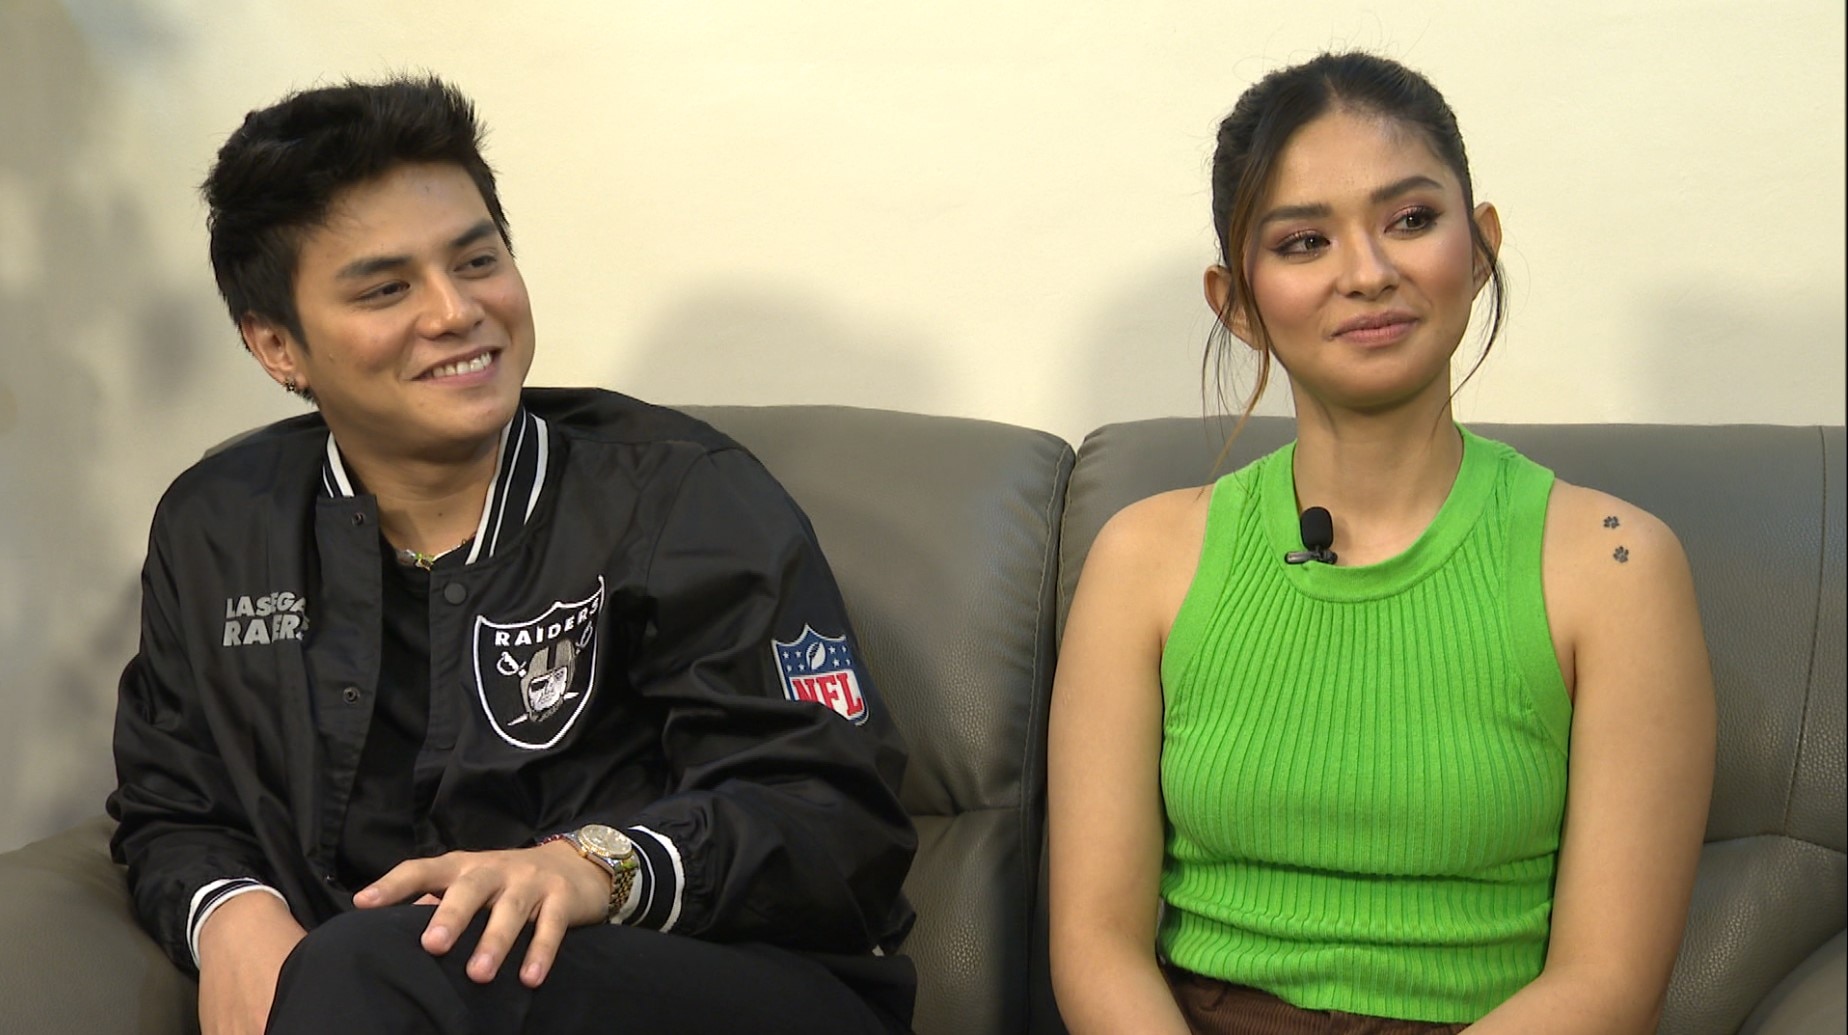 Loisa and Ronnie get real about their six-year love story in Bernadette’s “Tao Po”